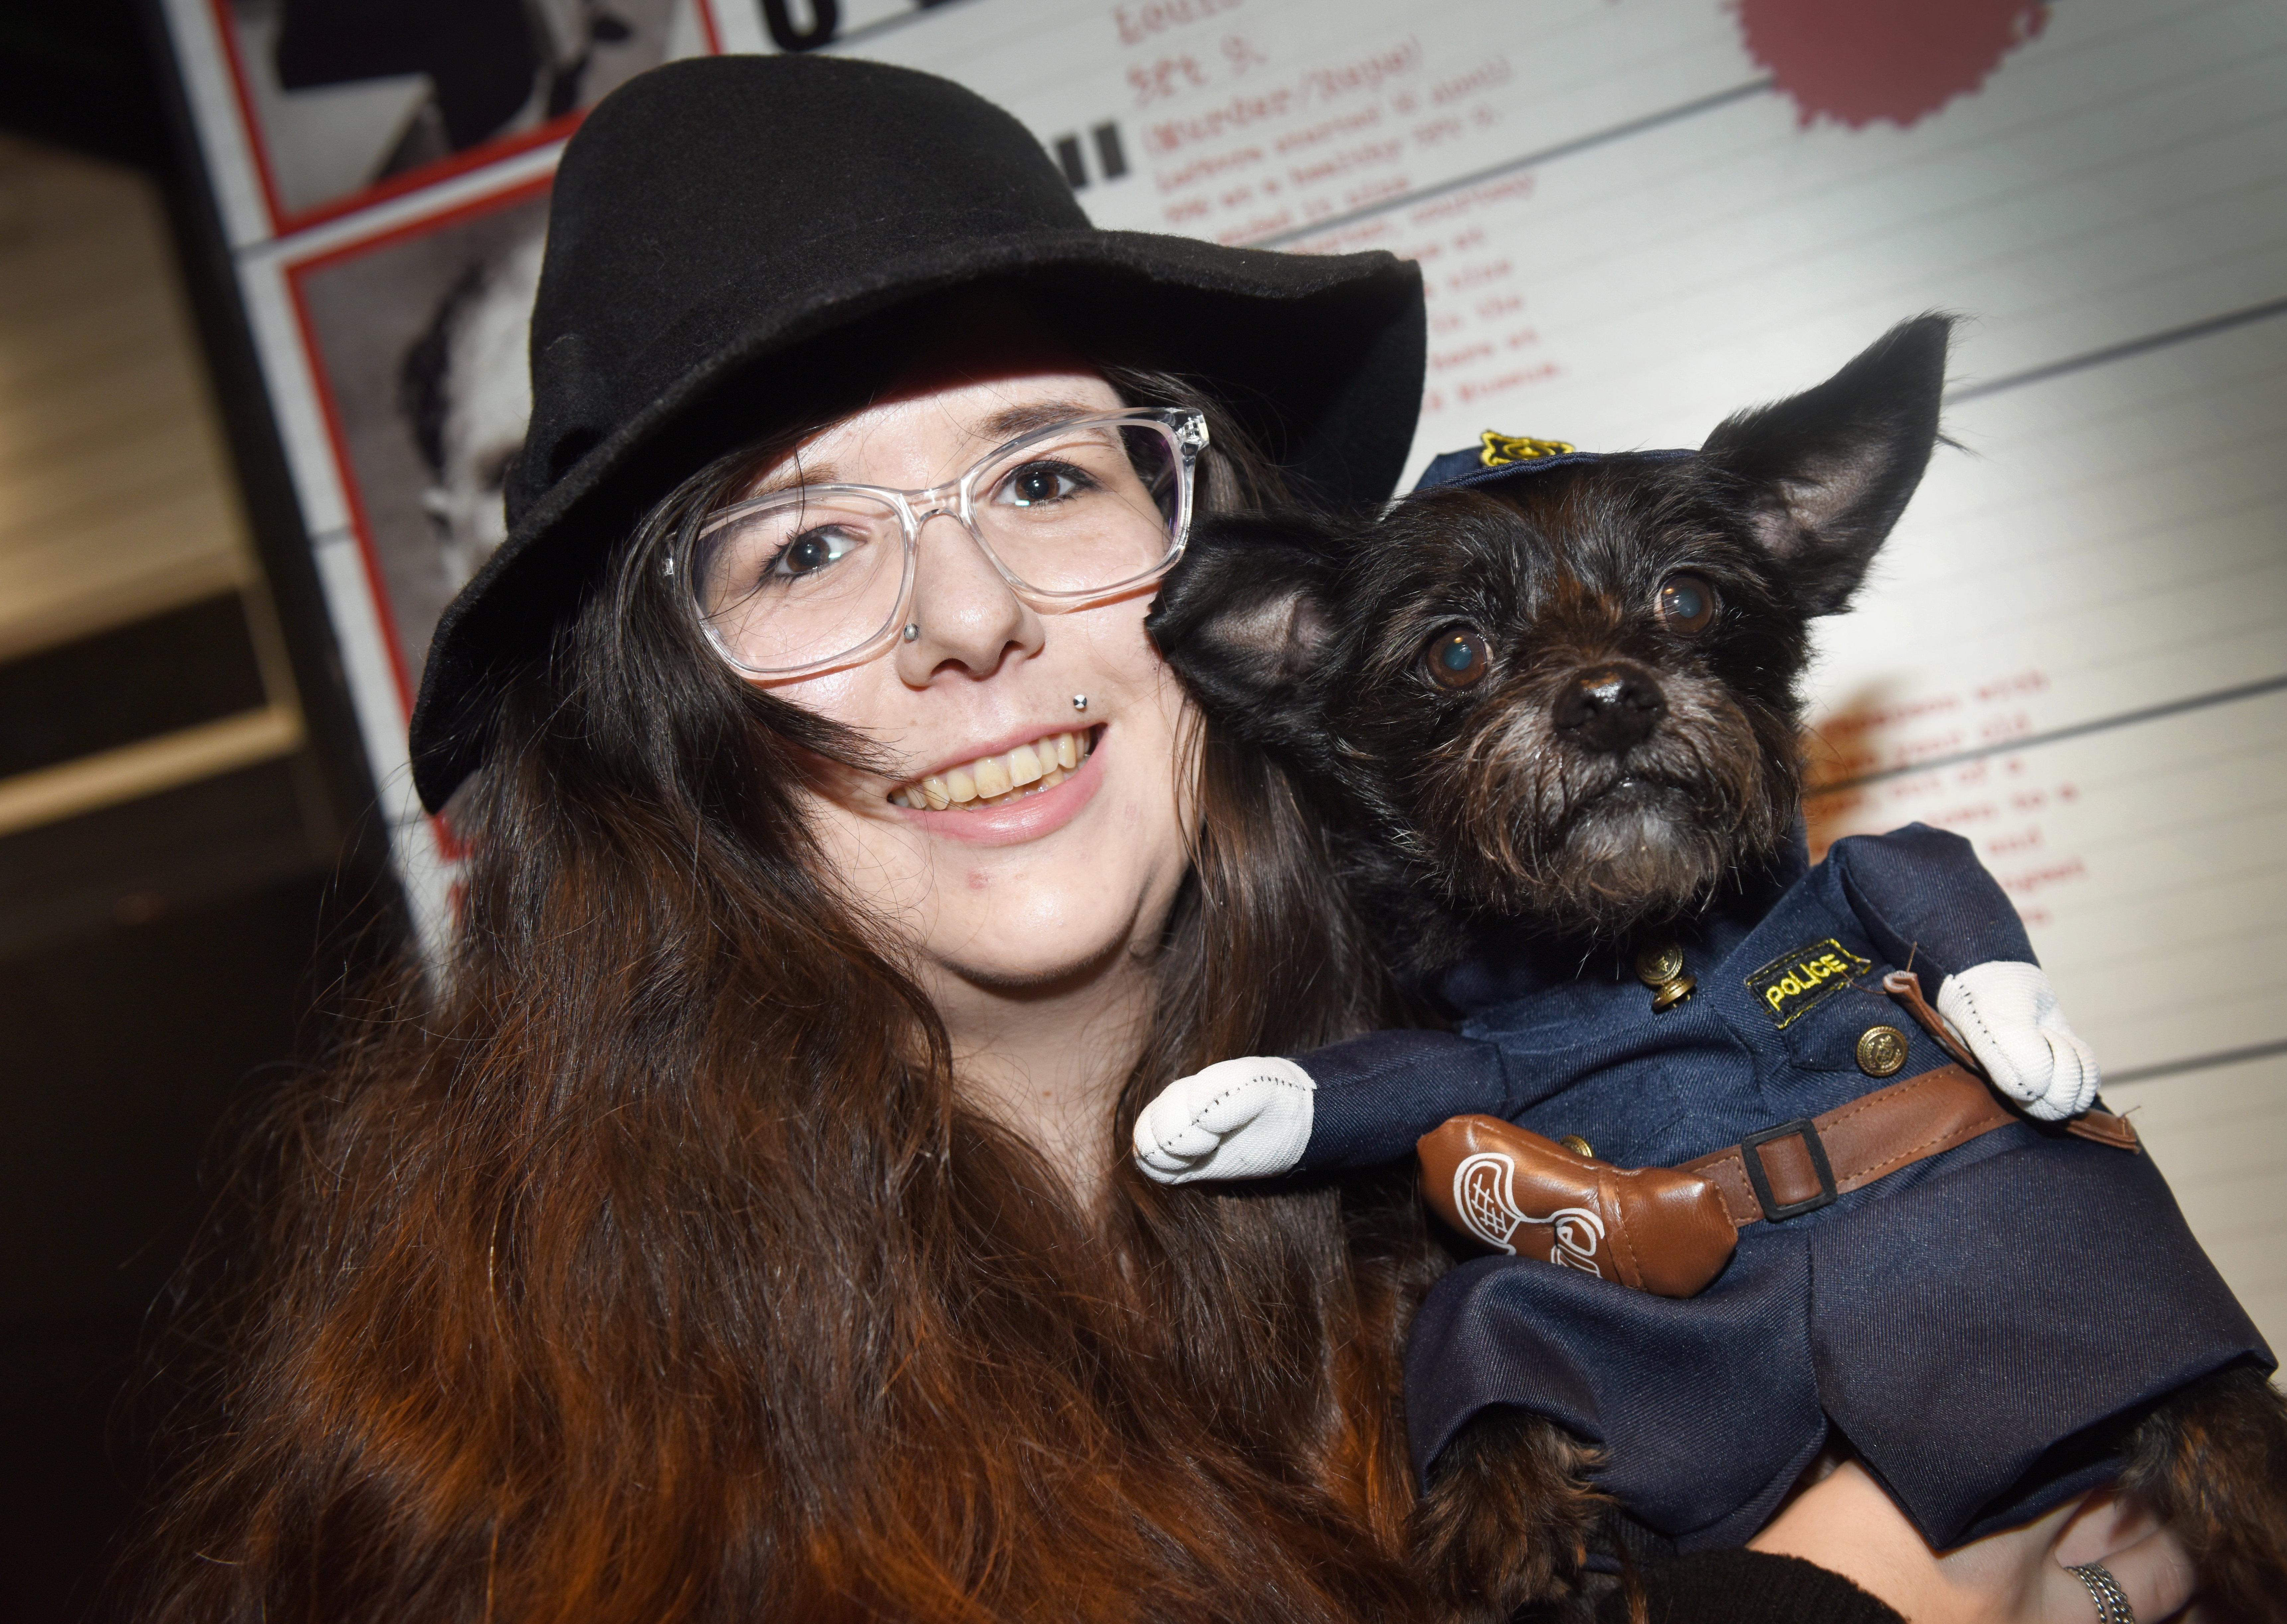 Dress Up Your Dog Day at the True Crime Museum in Hastings

Hanora Kew with Rocket. SUS-201201-162927001